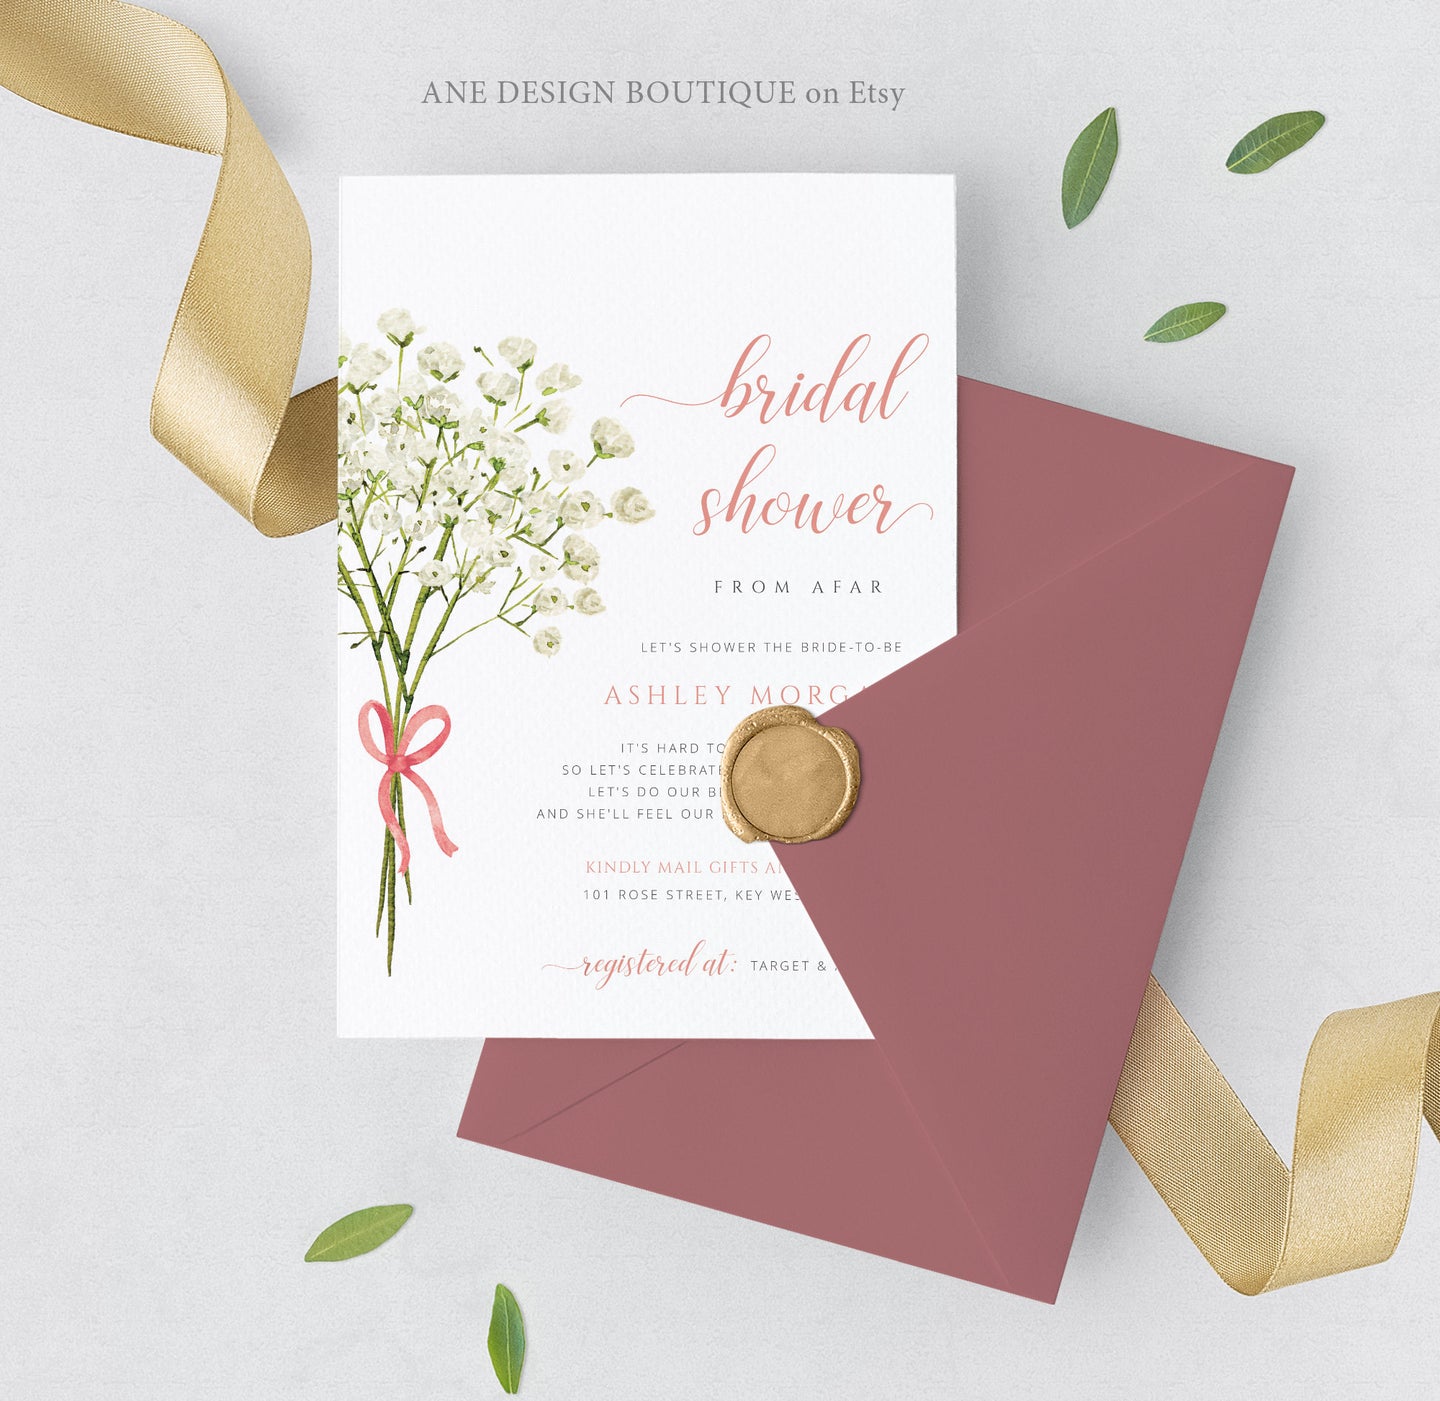 Gypsophila Rustic Bridal Shower by Mail Invitation Template, Baby's Breath Virtual Shower Invite, Editable, Printable, Instant Download 018